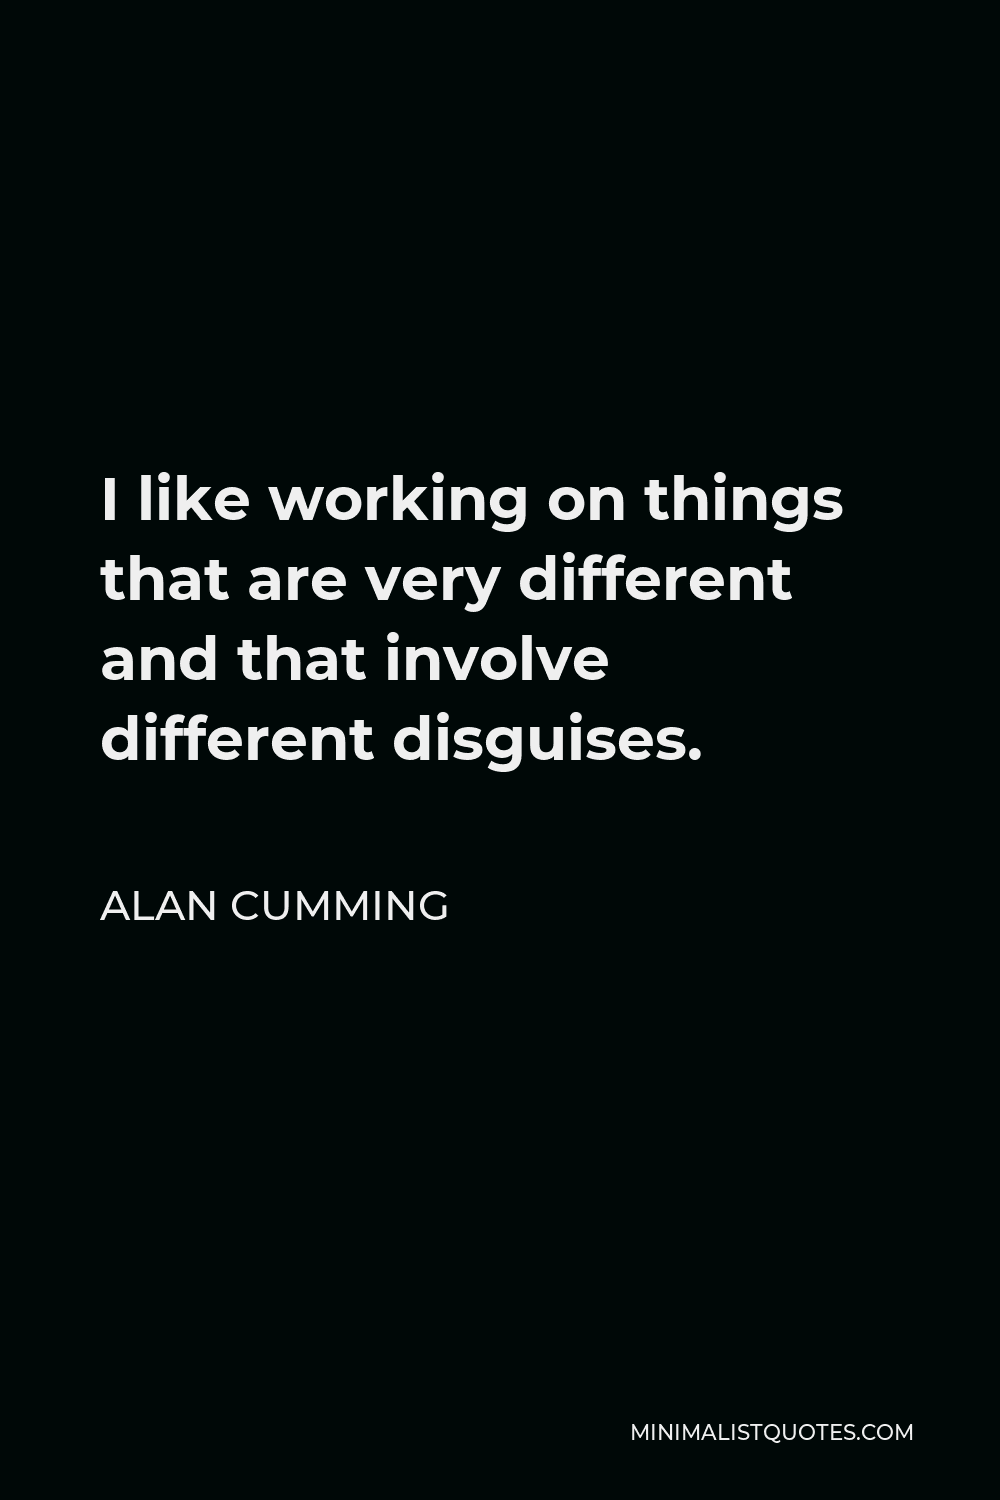 Alan Cumming Quote - I like working on things that are very different and that involve different disguises.